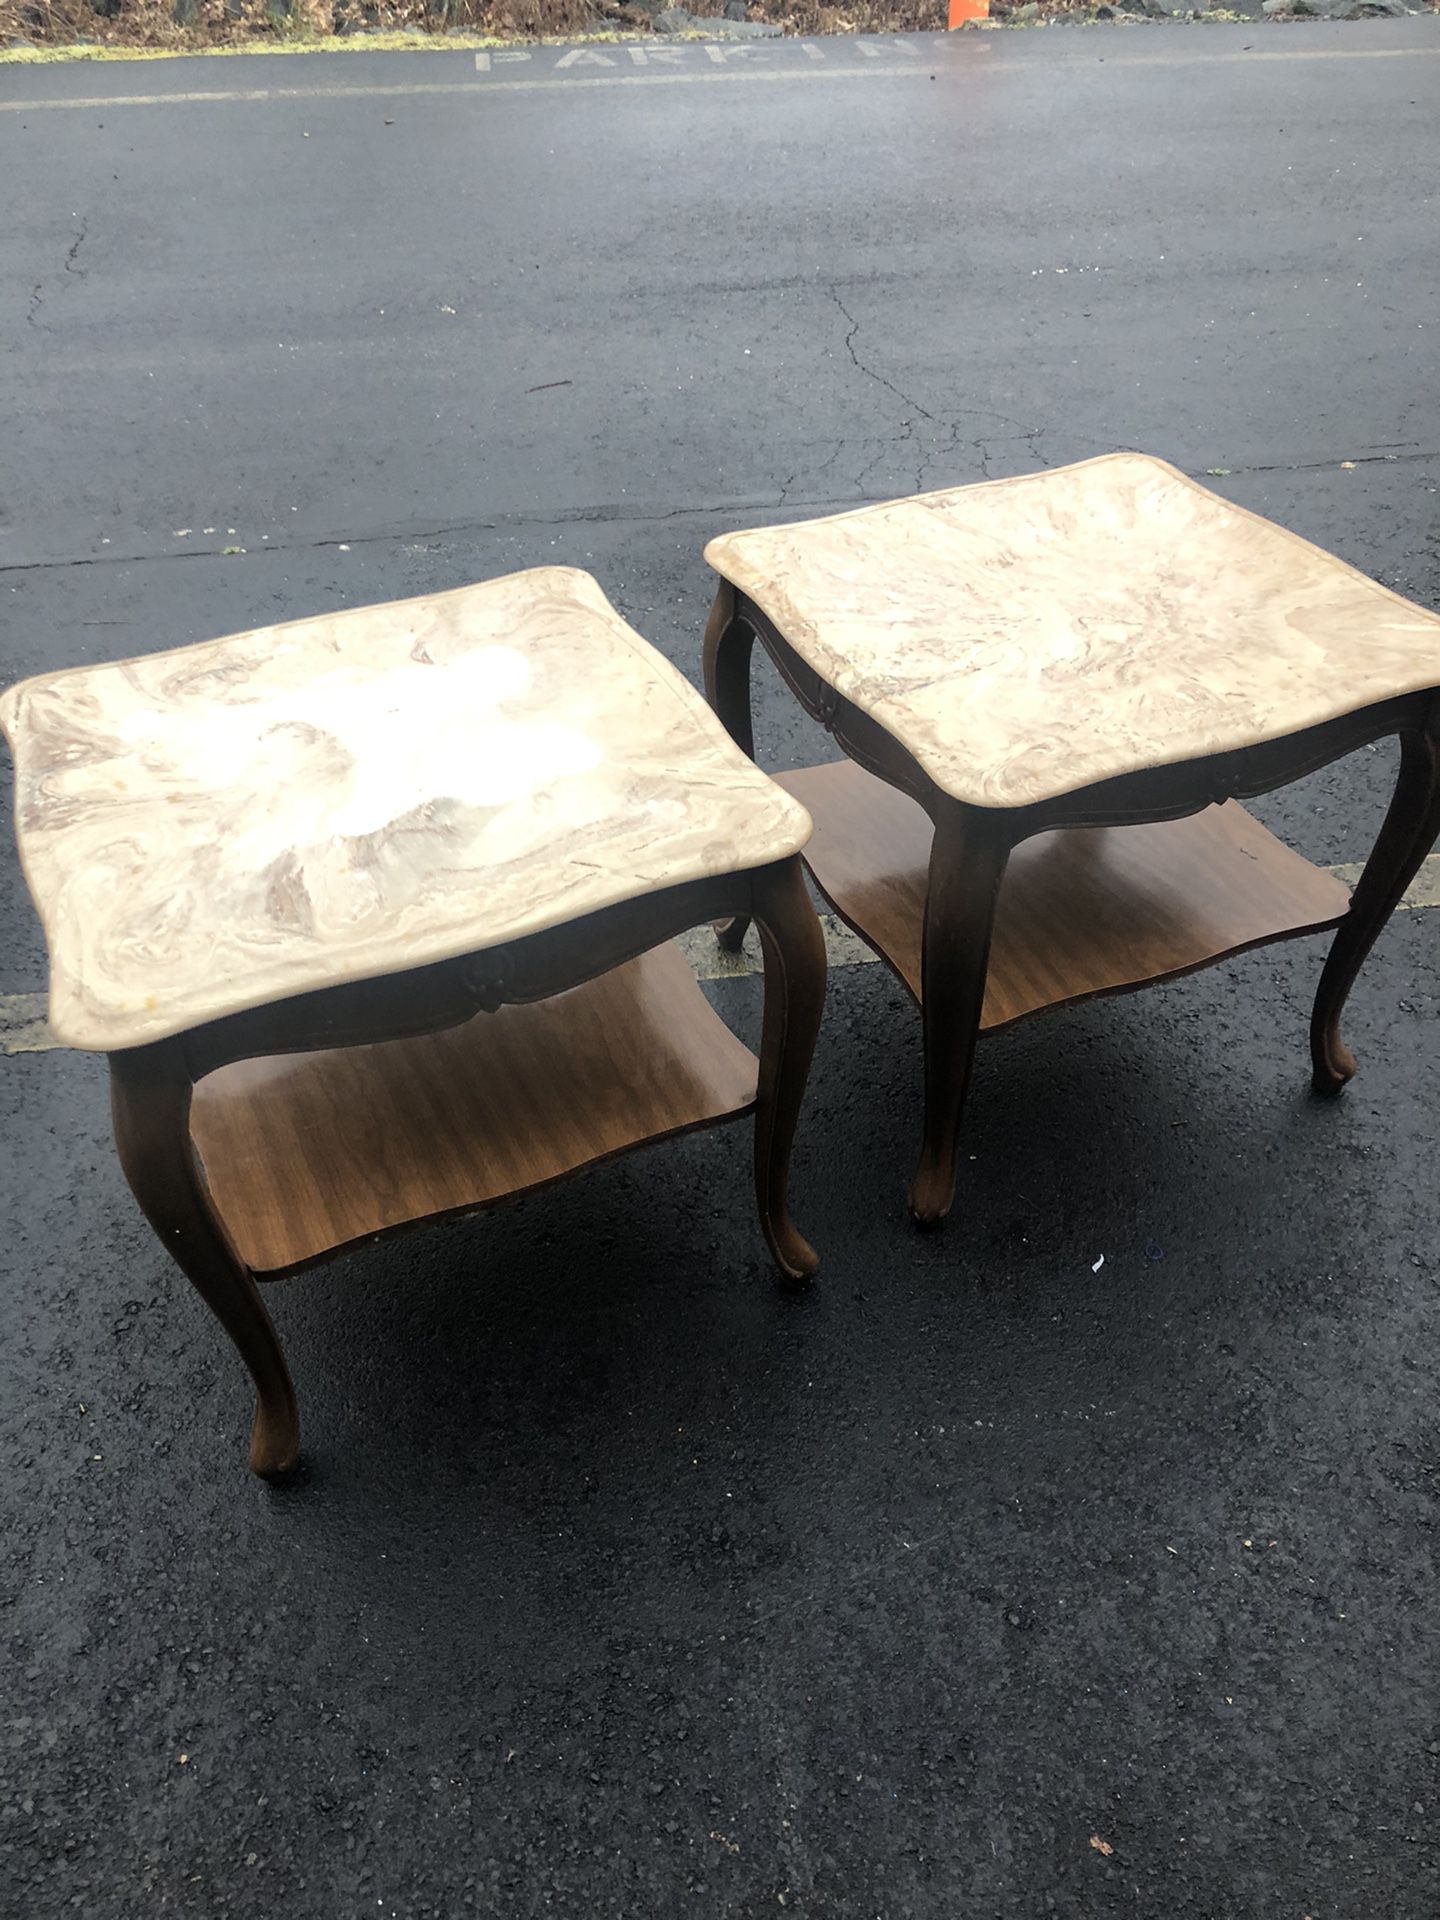 Two marble top end tables